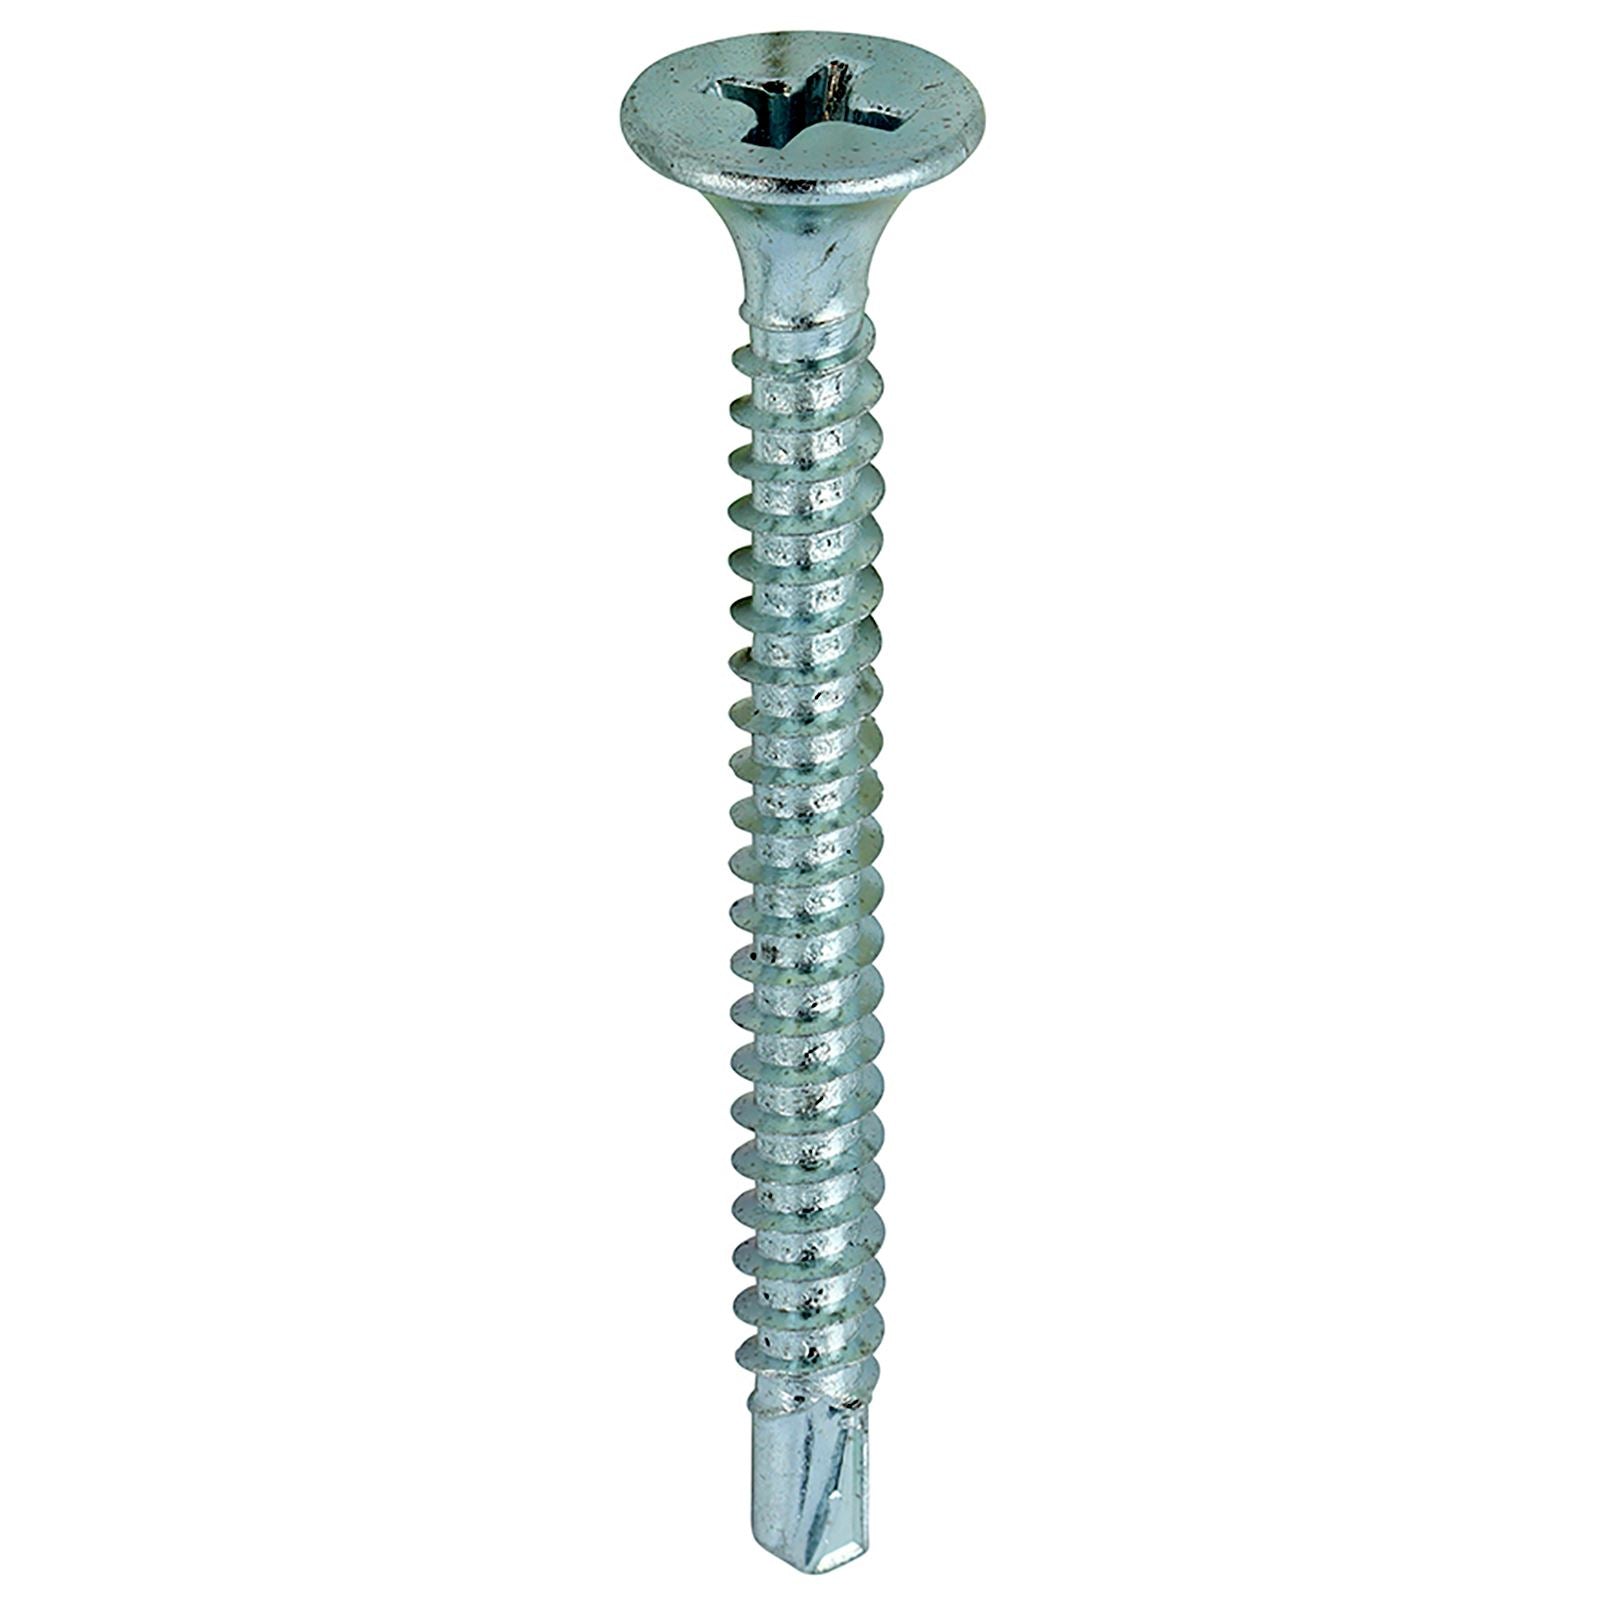 TIMCO Drywall Screws Self Drilling Tapping Screw Countersunk Bugle Head Zinc Phillips